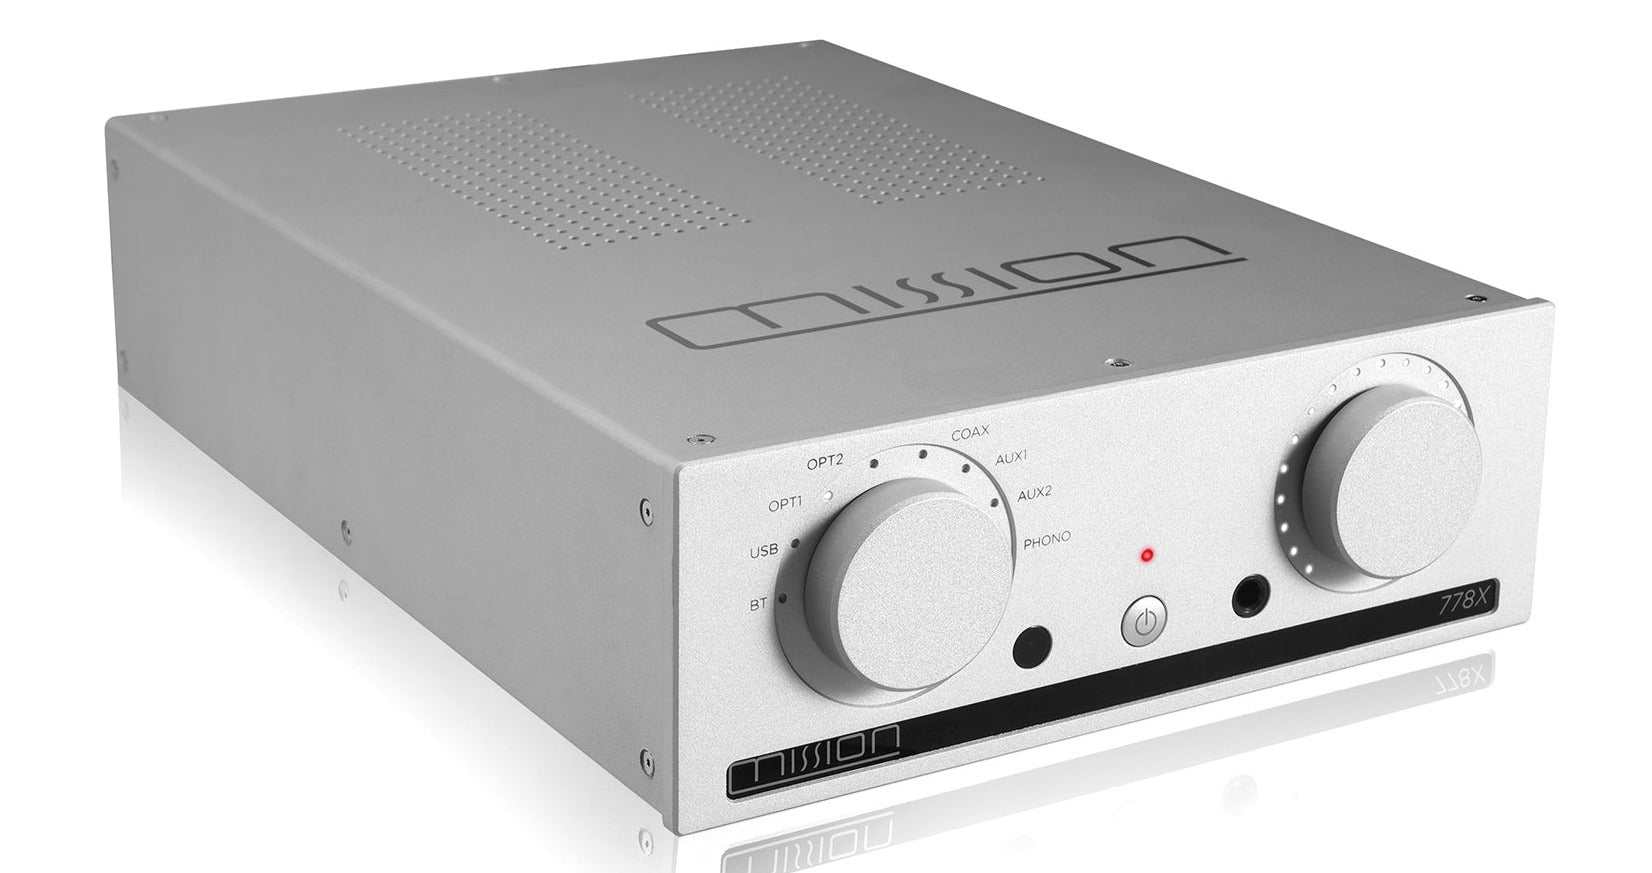 Mission 778X Integrated Amplifier